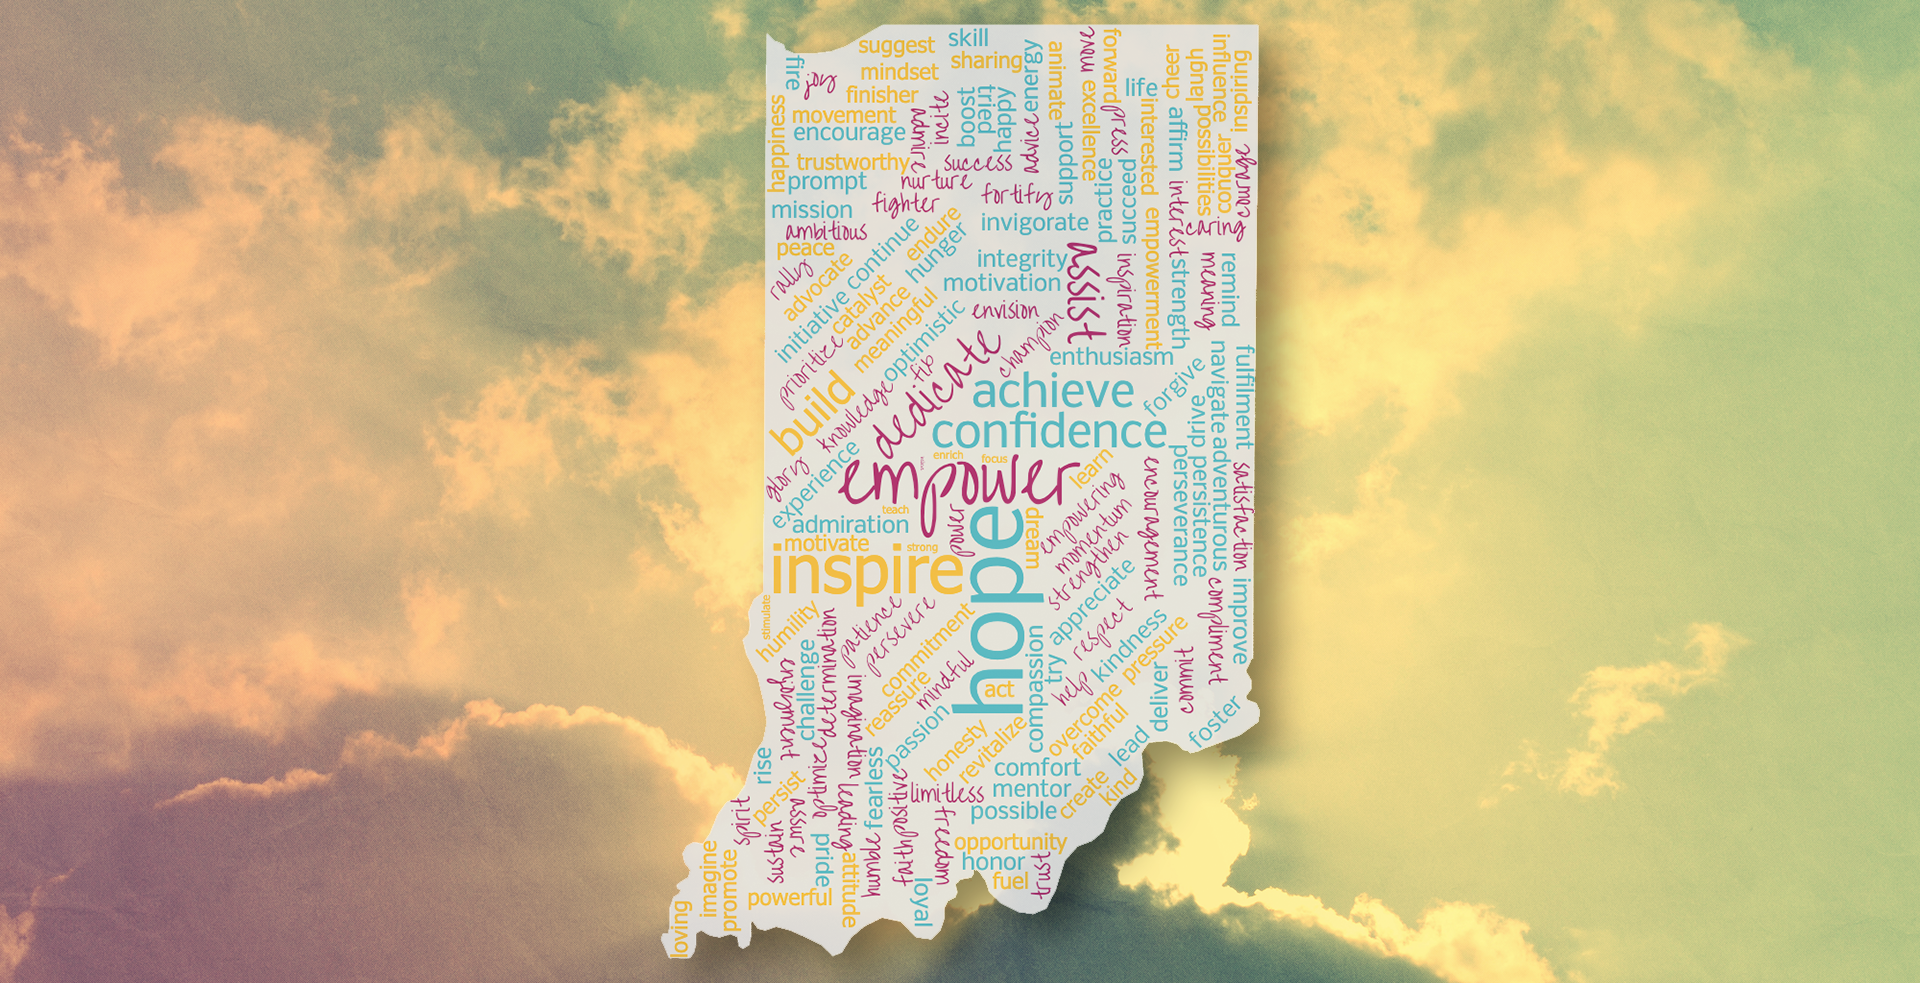 Recovery orgnization - Indiana Addictions Issues Coalition